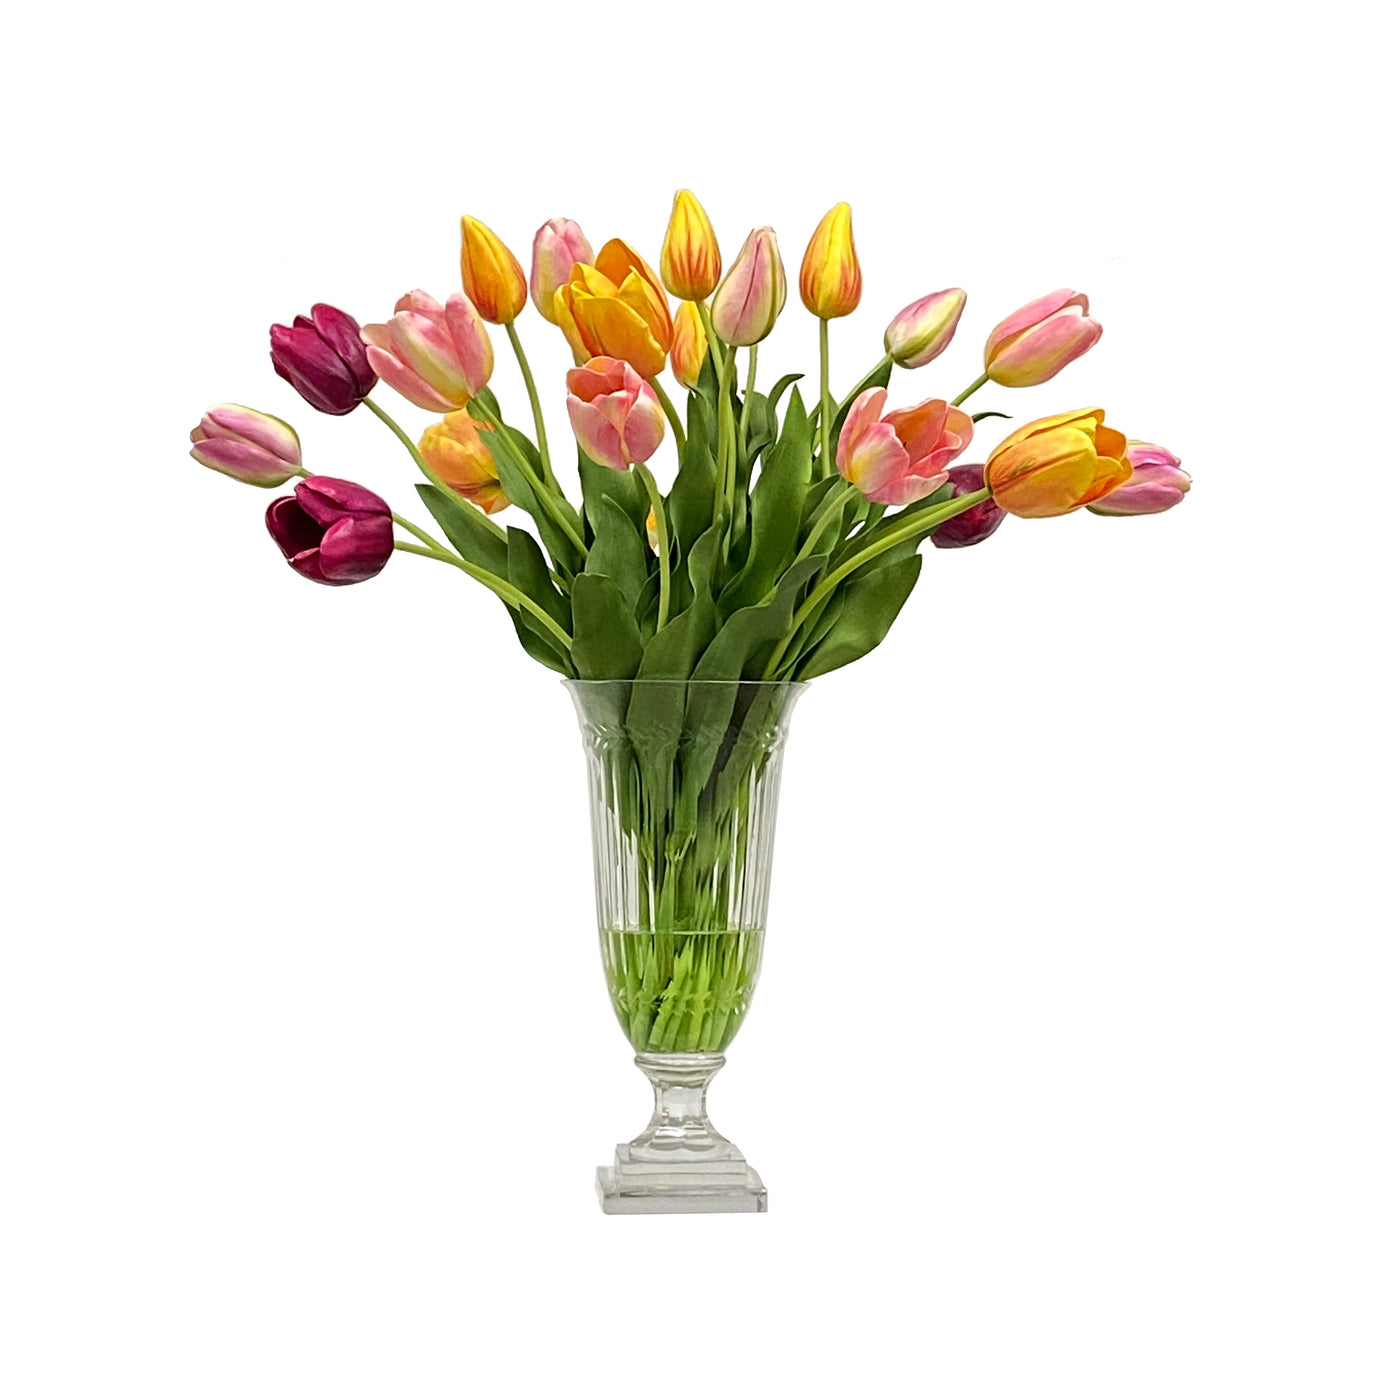 Mixed Tulips in Cut Vase 27 inches